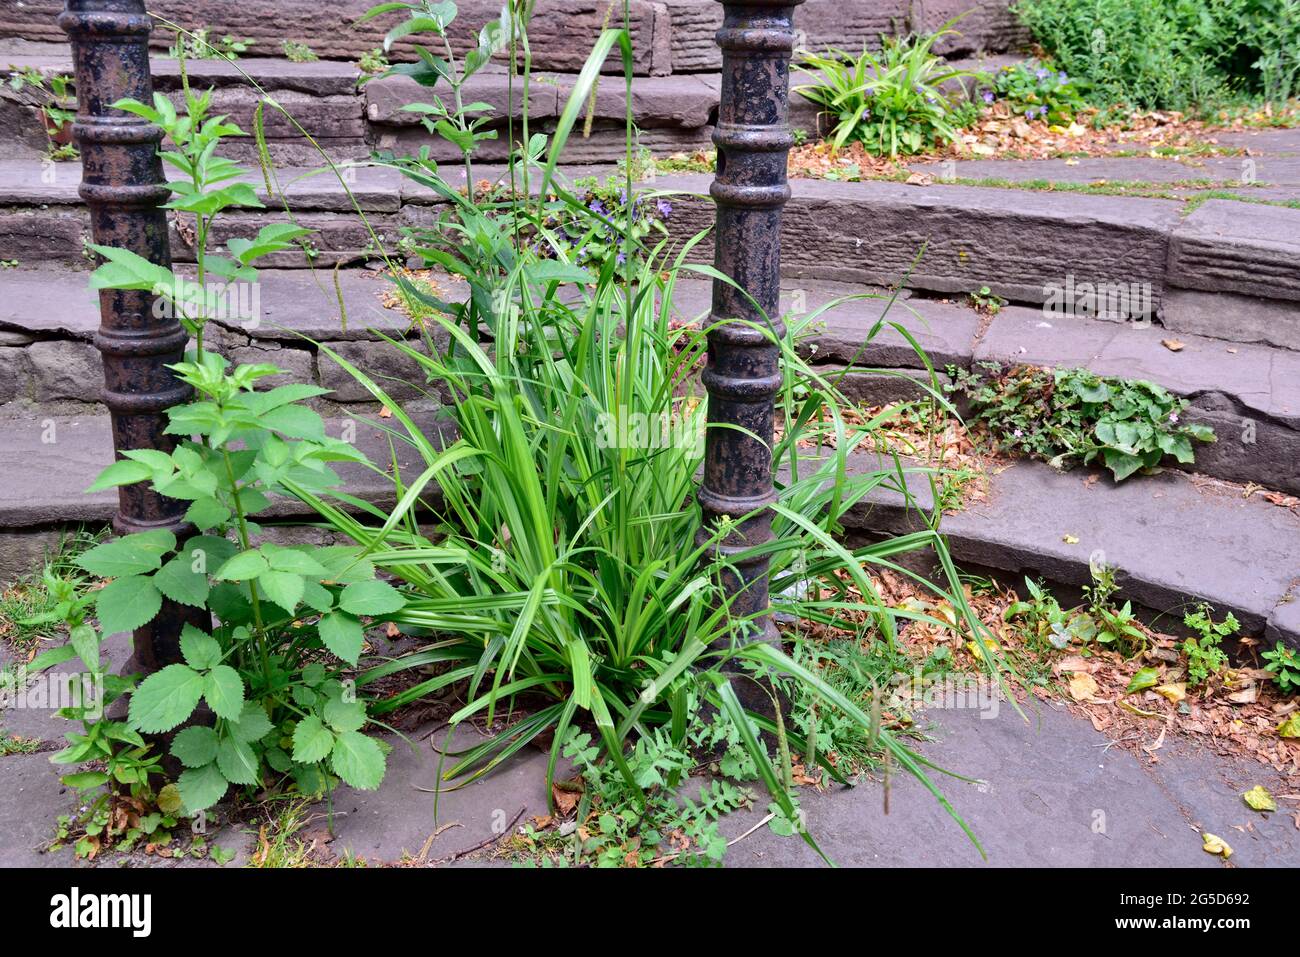 Weeds growing through pavement on set of stone footpath steps Stock Photo